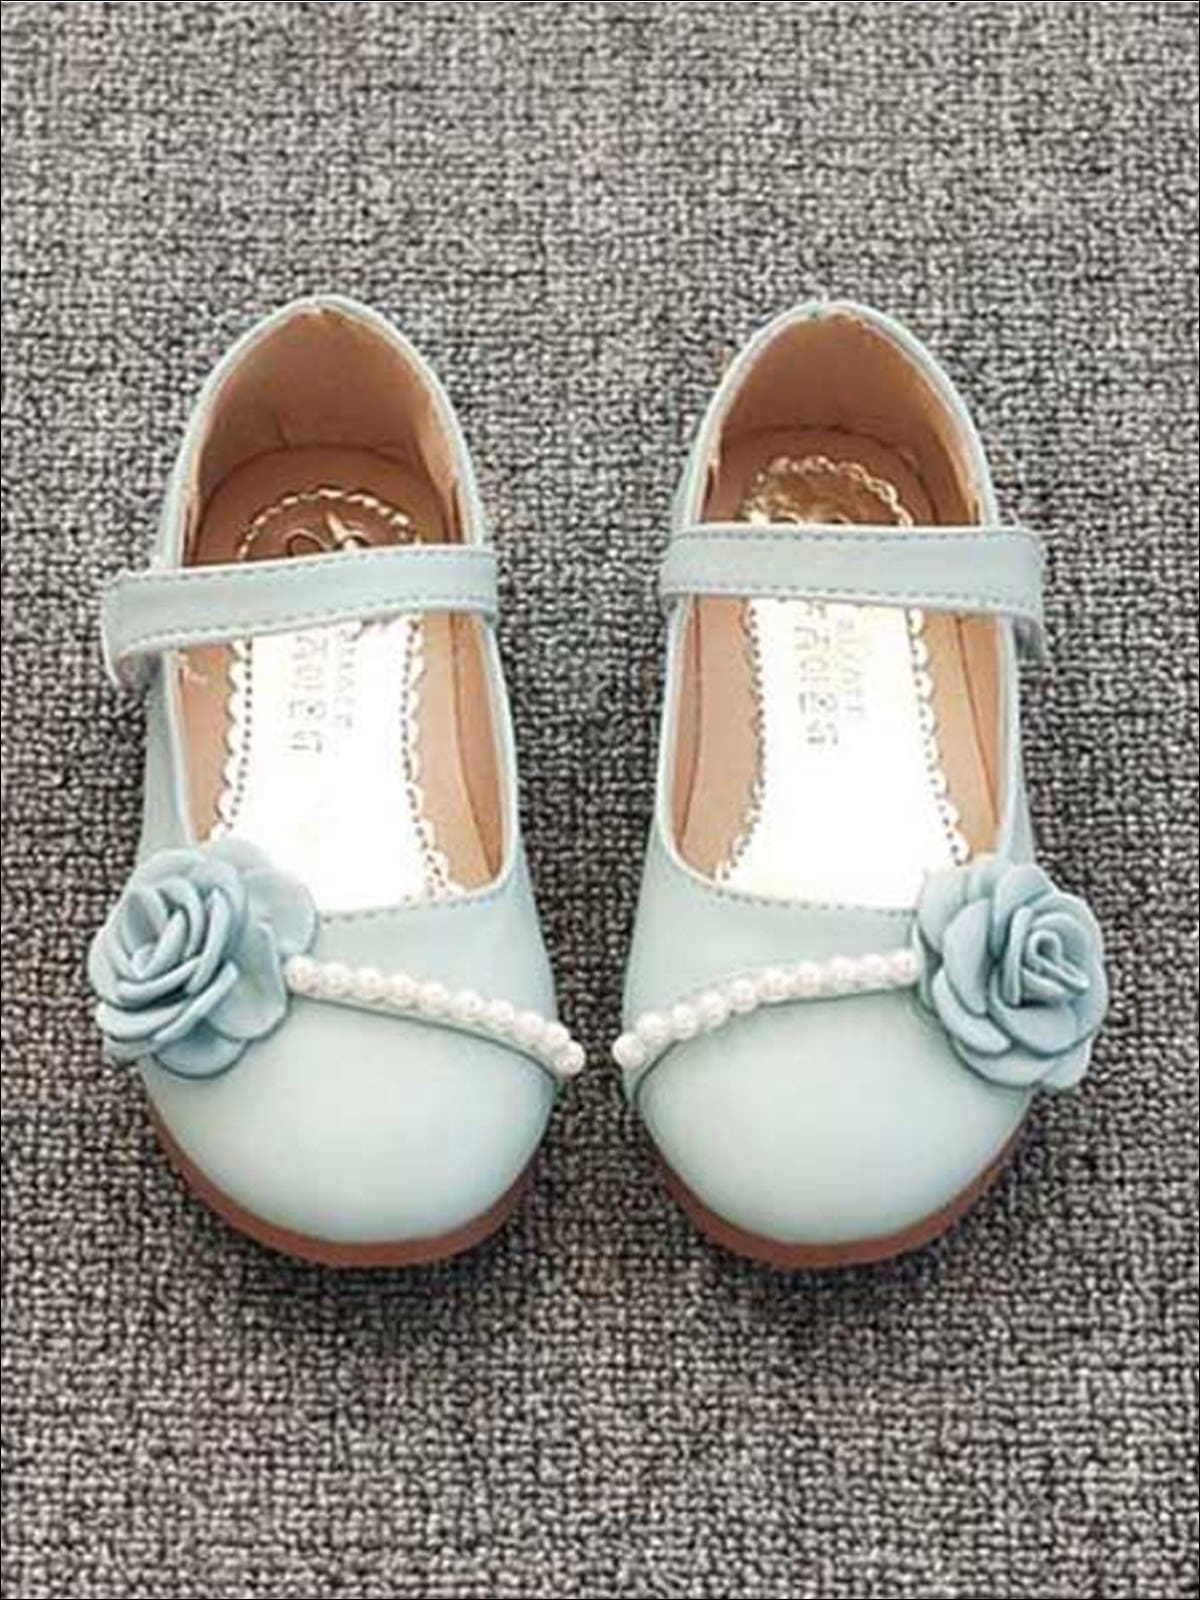 Girls Leather Flats with Flower and Pearl Embellishments - Sky Blue / 7.5 - Girls Flats